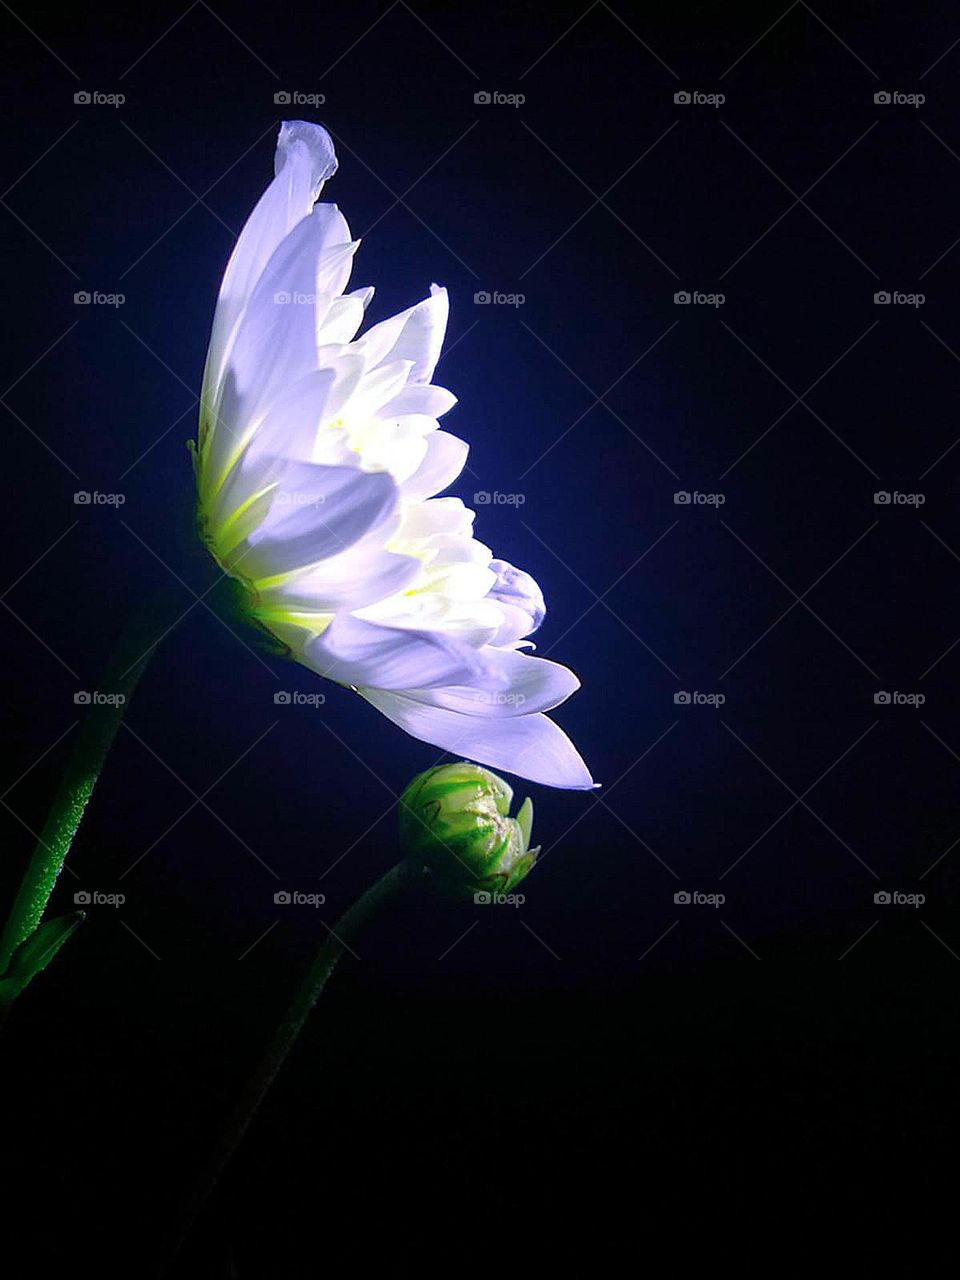 White color.  On a dark blue background, a white flower and bud.  Contrast gives a glow to the white color of the flower